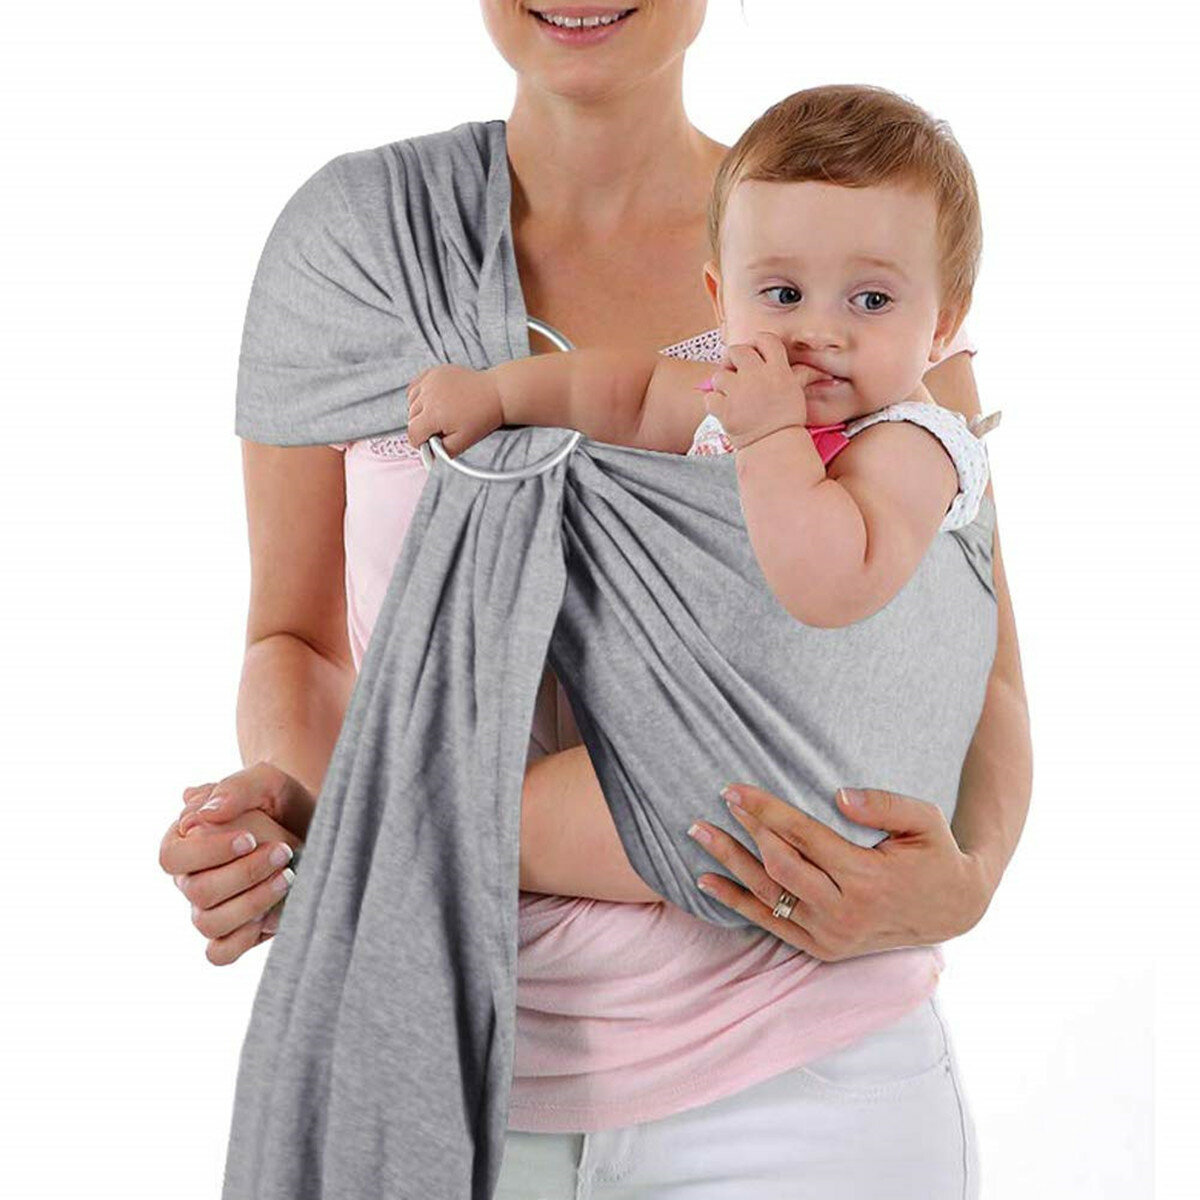 Cotton Baby Carrier Wrap Breathable Hip-seat Stretchy Baby Wrap Sling Nursing Cover Outdoor Travel